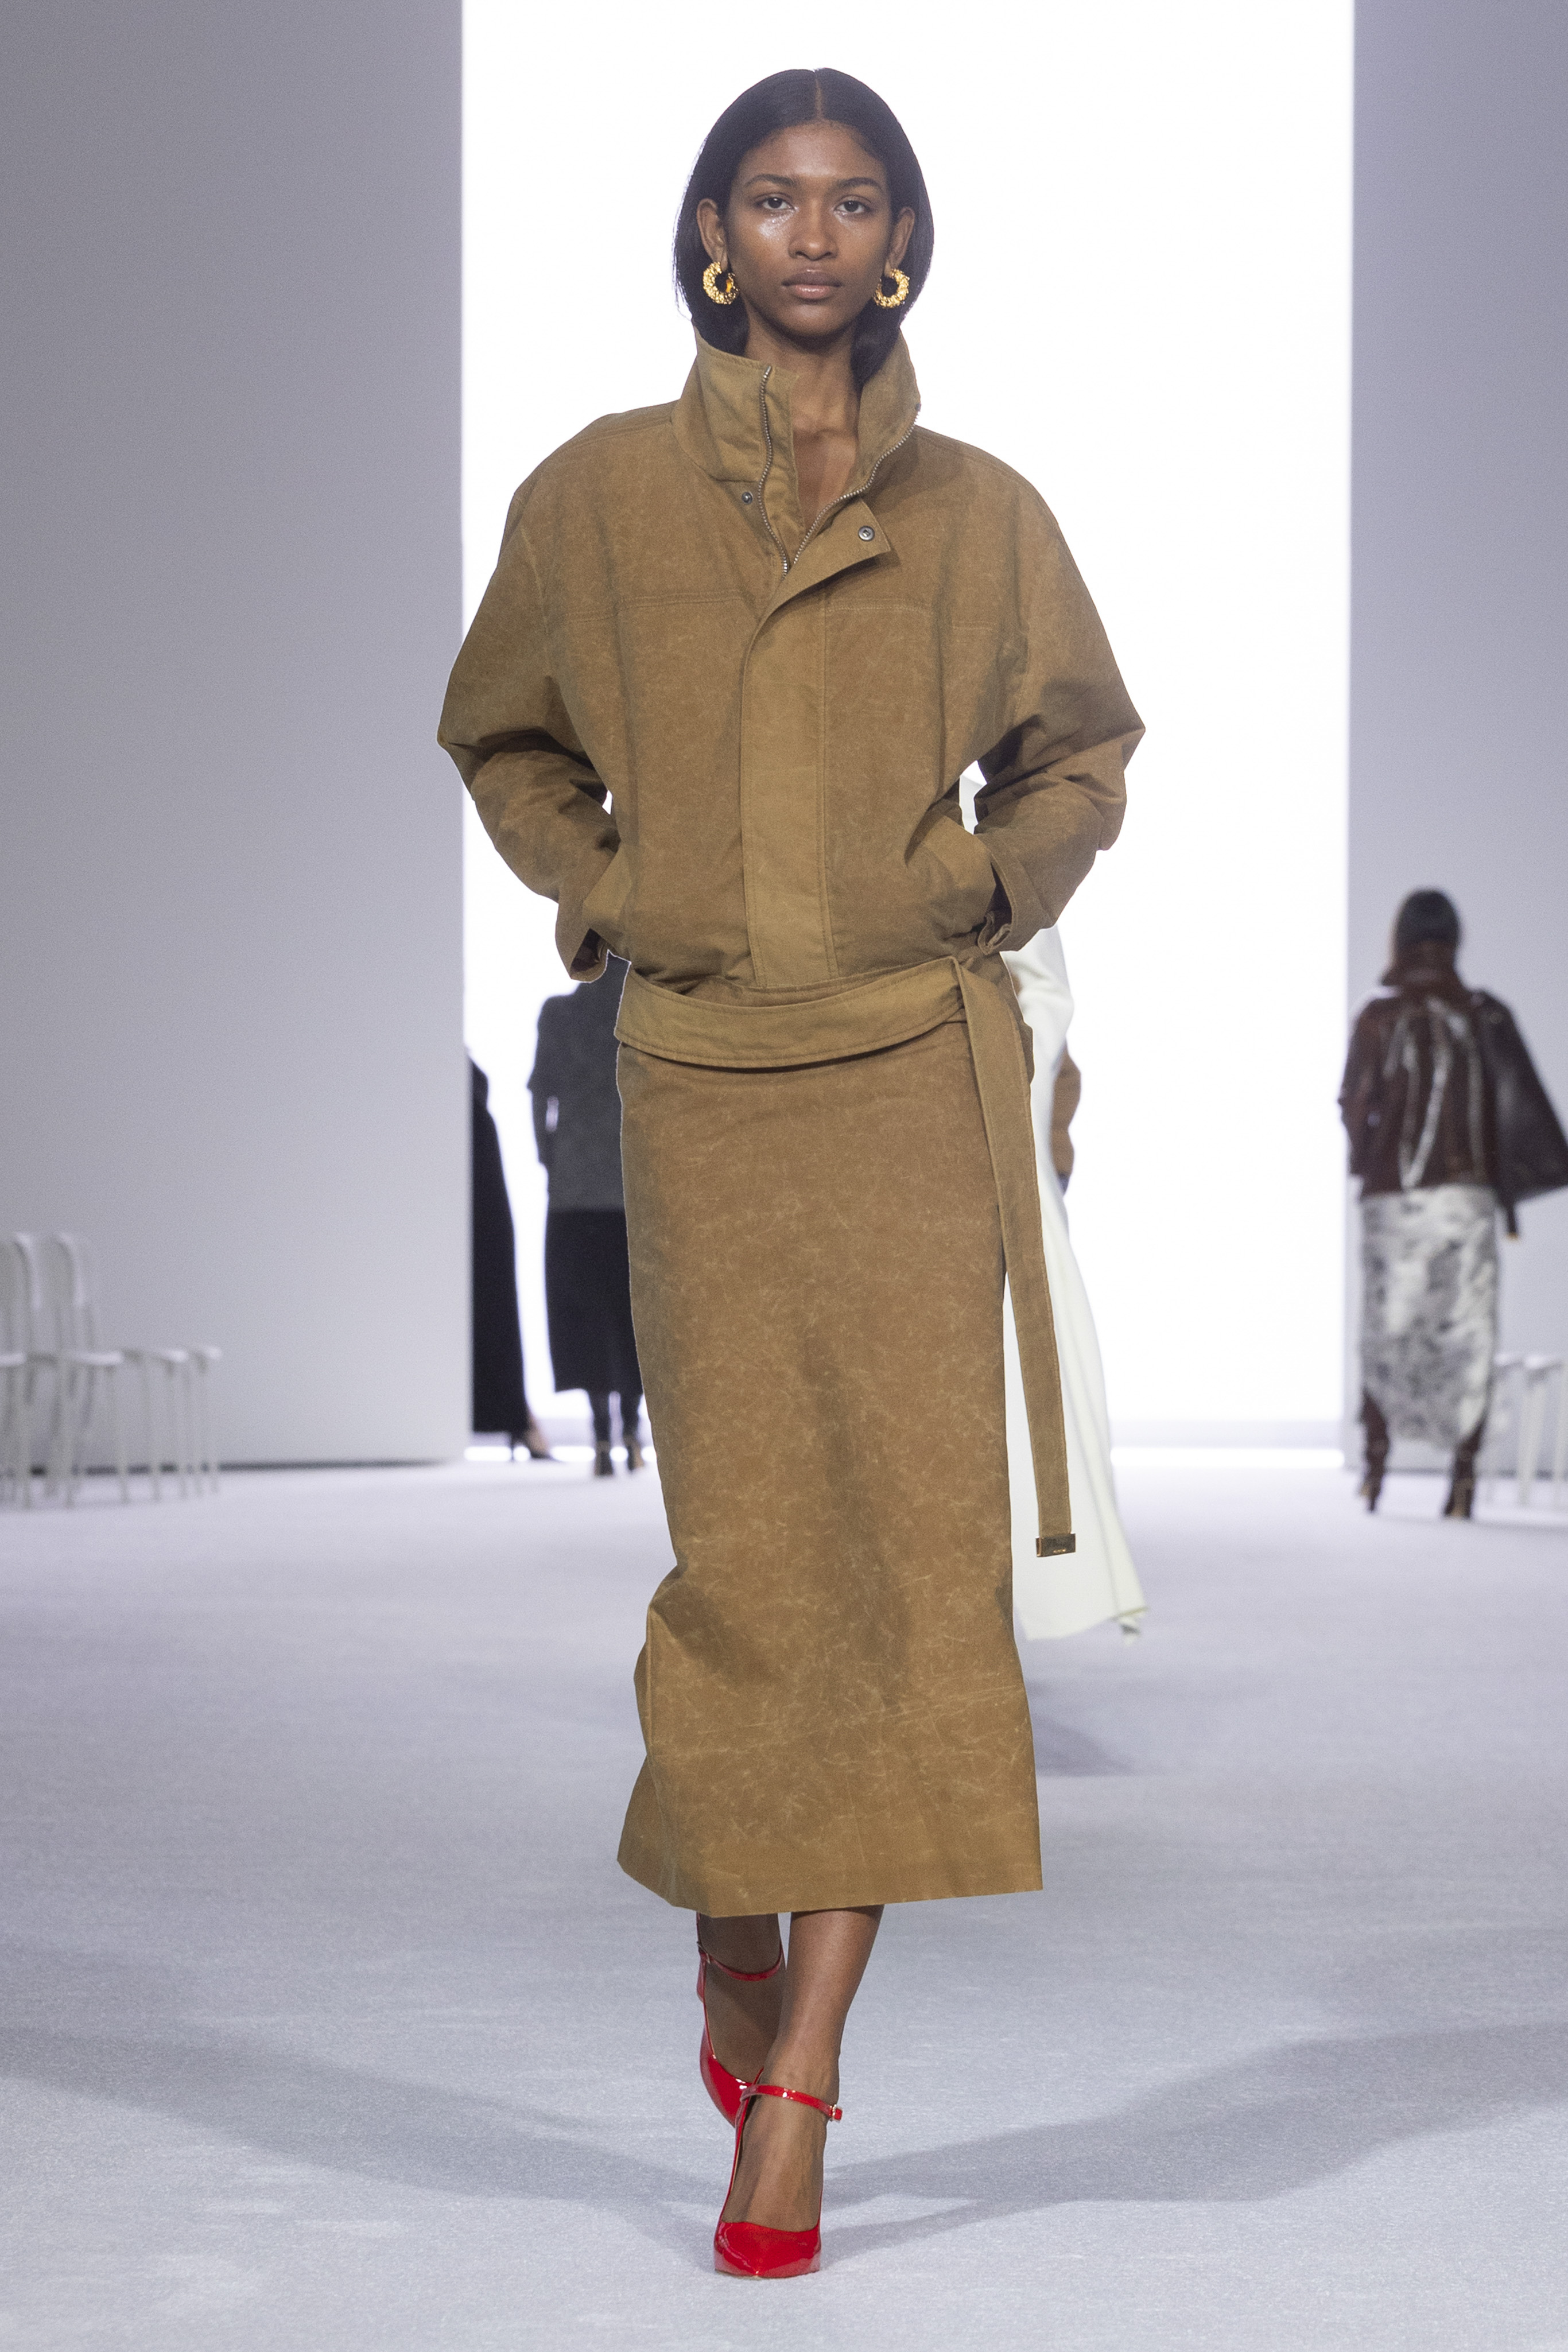 A Brandon Maxwell model wearing a tan workwear jacket with a matching pencil skirt at the FW24 show.